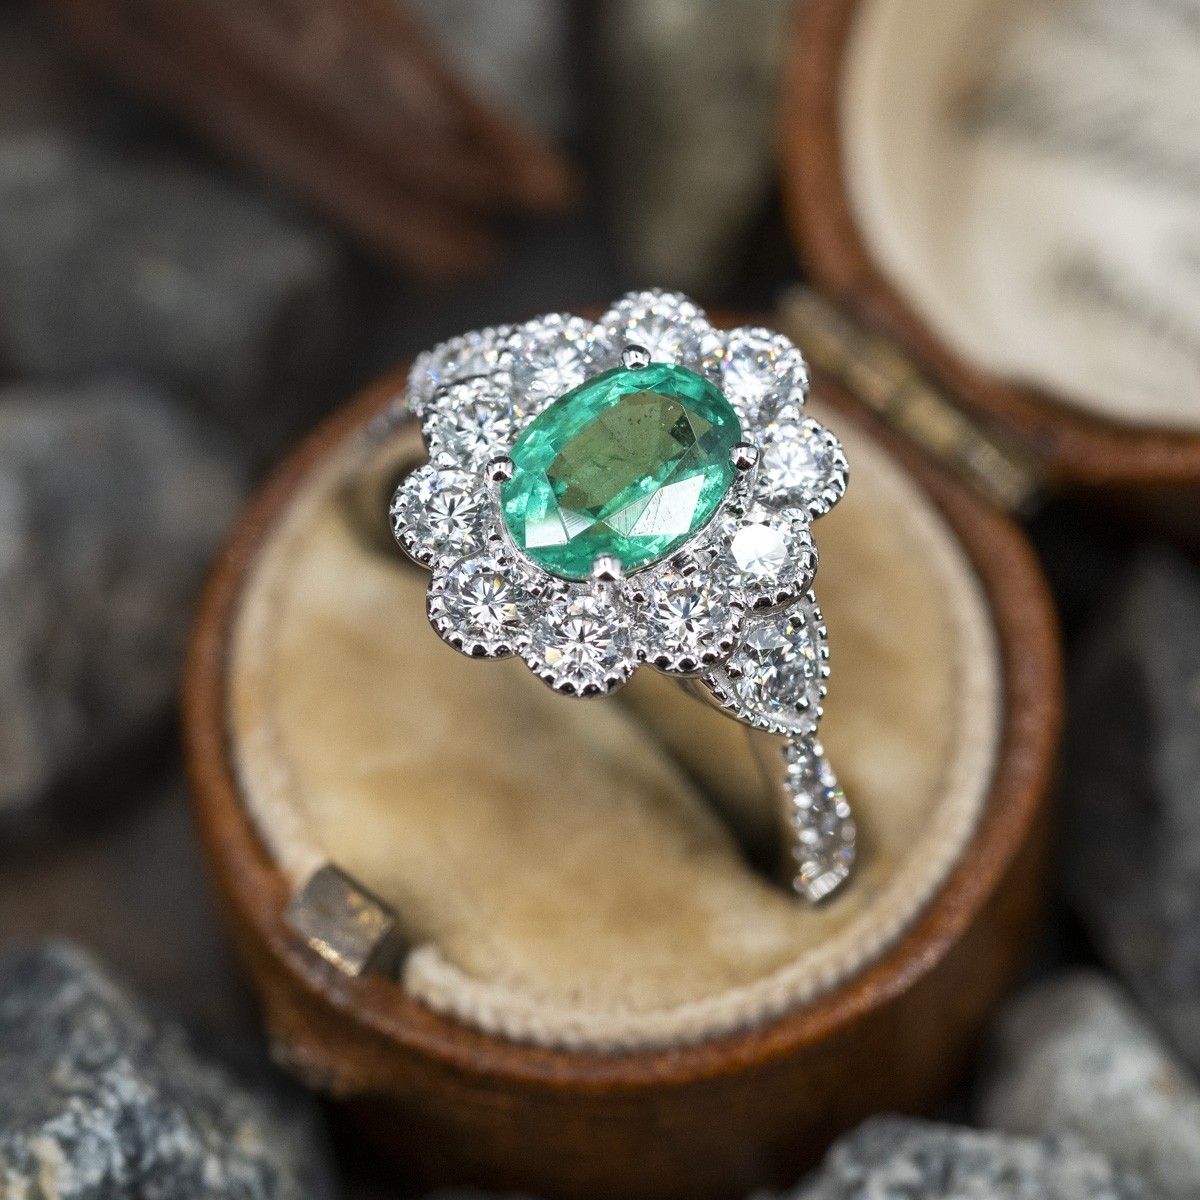 Oval Cut Emerald Ring w/ Diamond Accents 18K White Gold